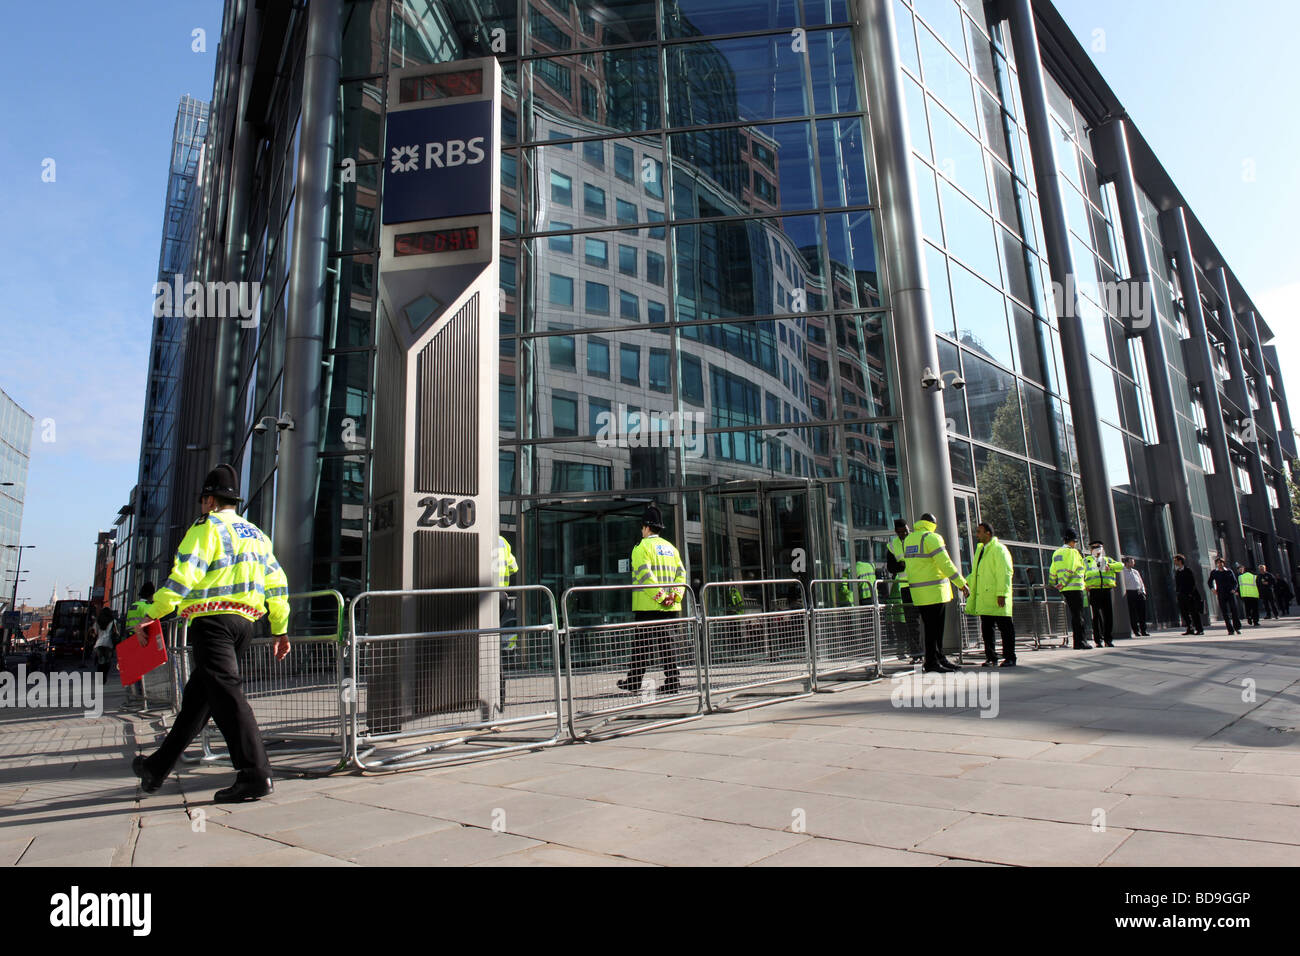 Police outside Royal Bank of Scotland in central London Stock Photo